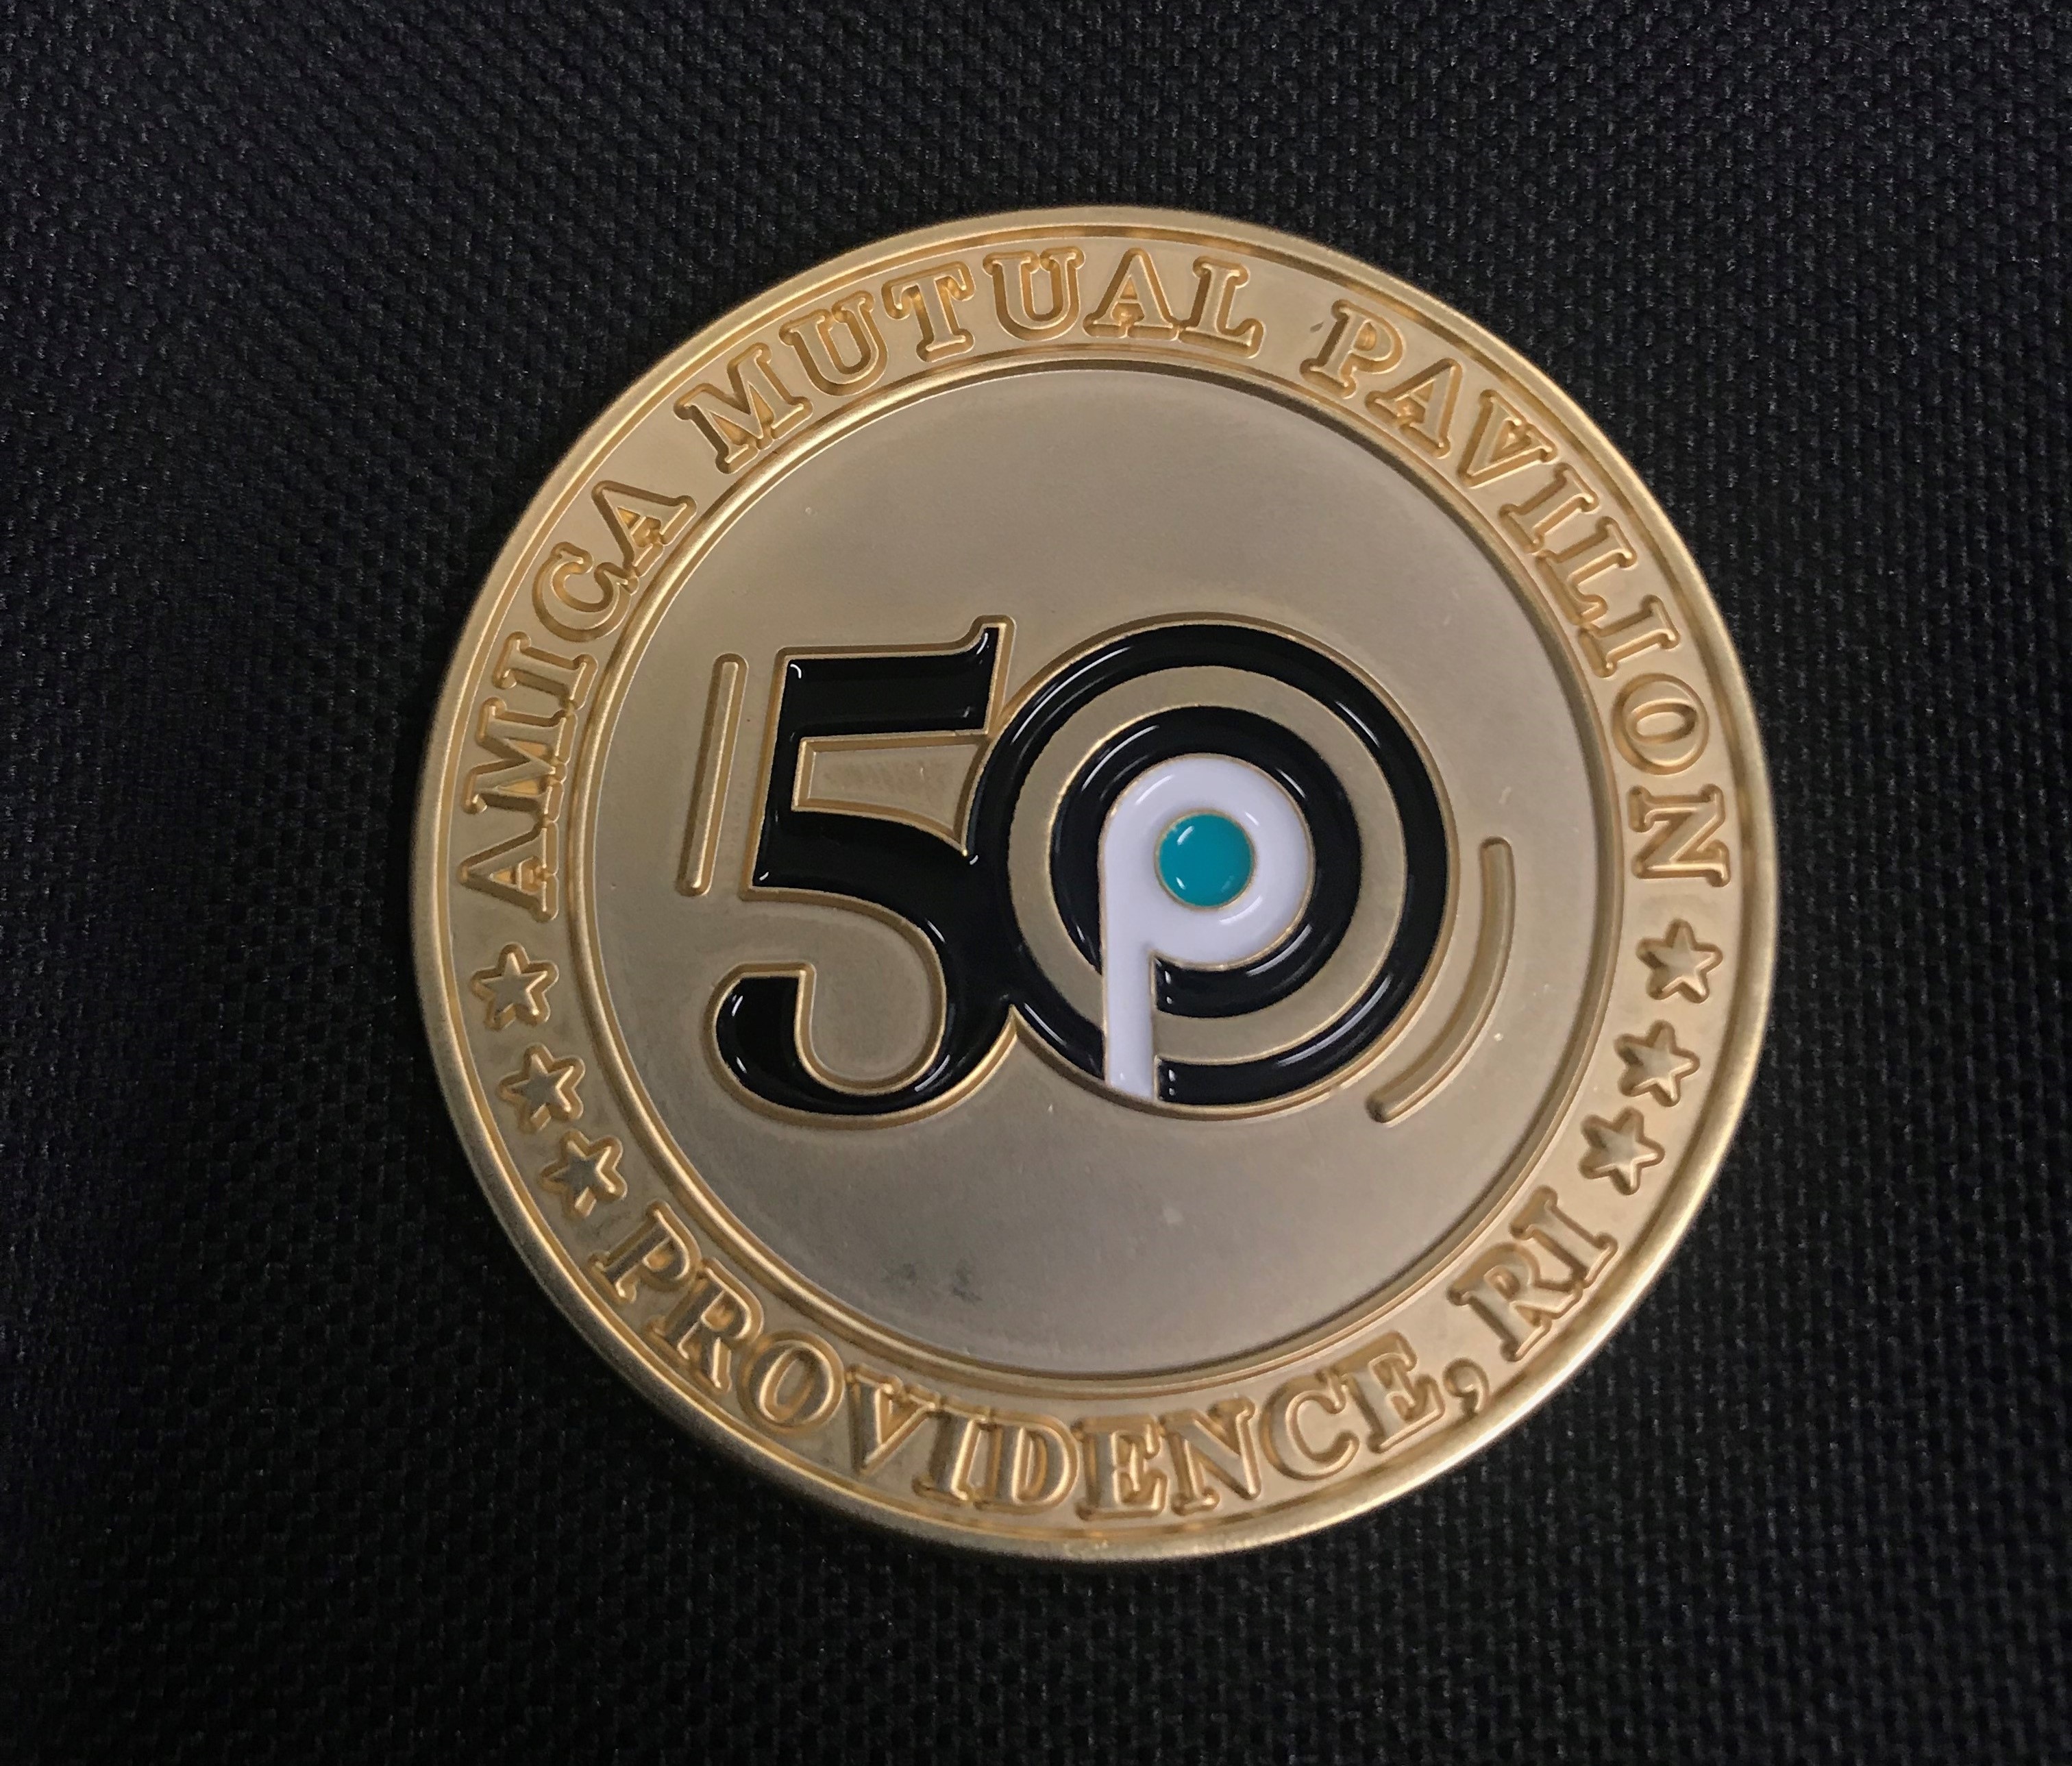 A COMMEMORATIVE COIN signifying the 50th anniversary of the Amica Mutual Pavilion will be used for promotional purposes throughout the year.  / PBN PHOTO/JAMES BESSETTE